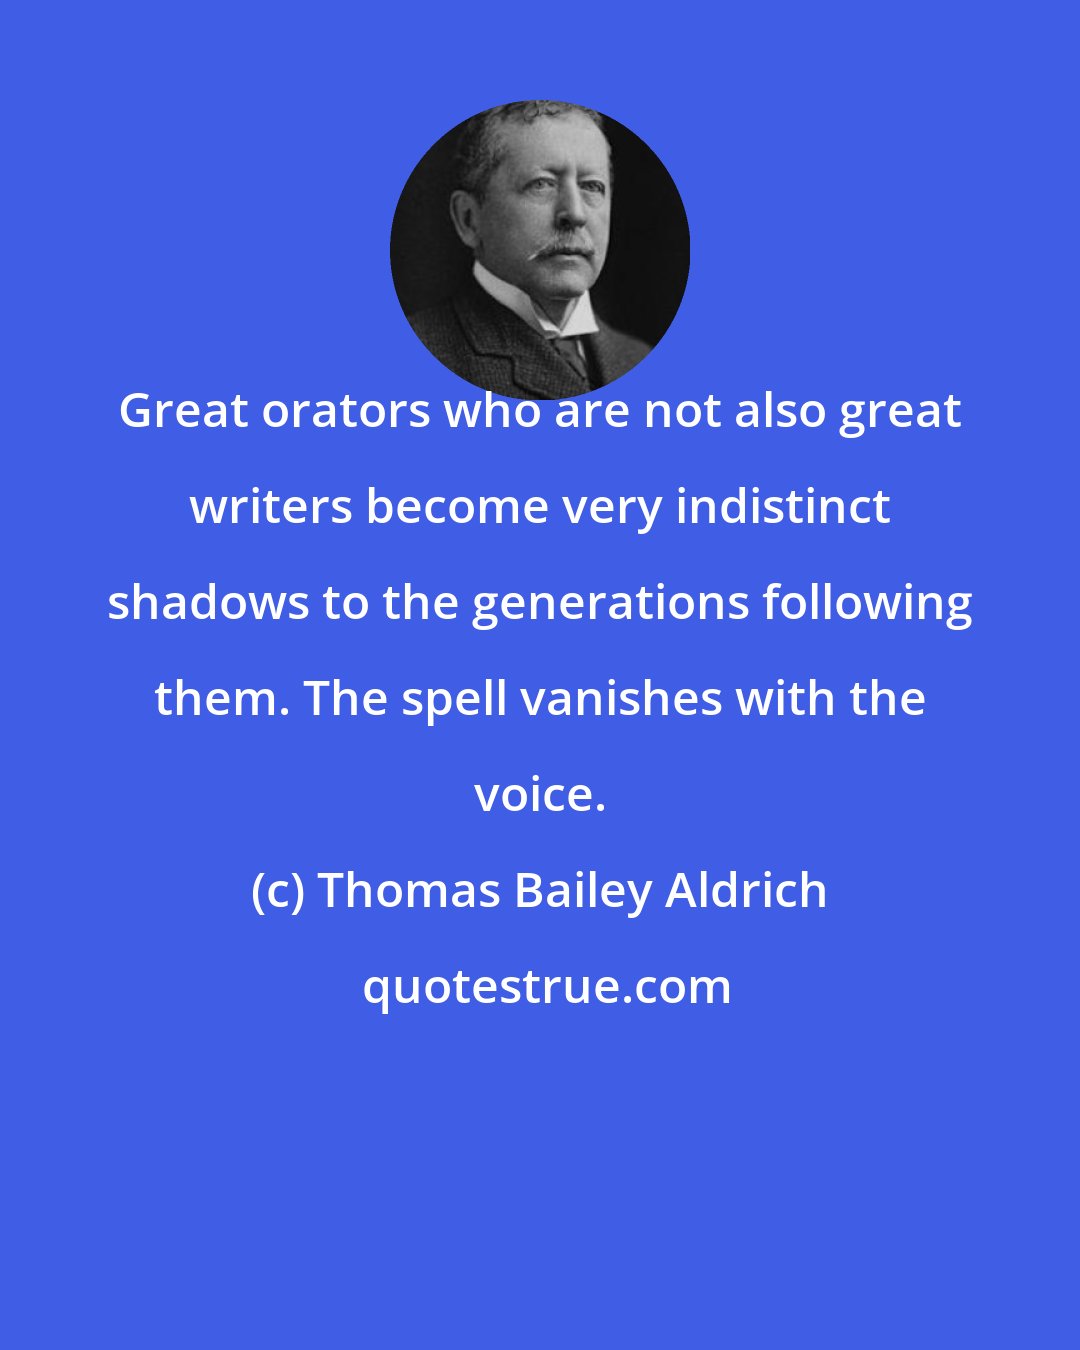 Thomas Bailey Aldrich: Great orators who are not also great writers become very indistinct shadows to the generations following them. The spell vanishes with the voice.